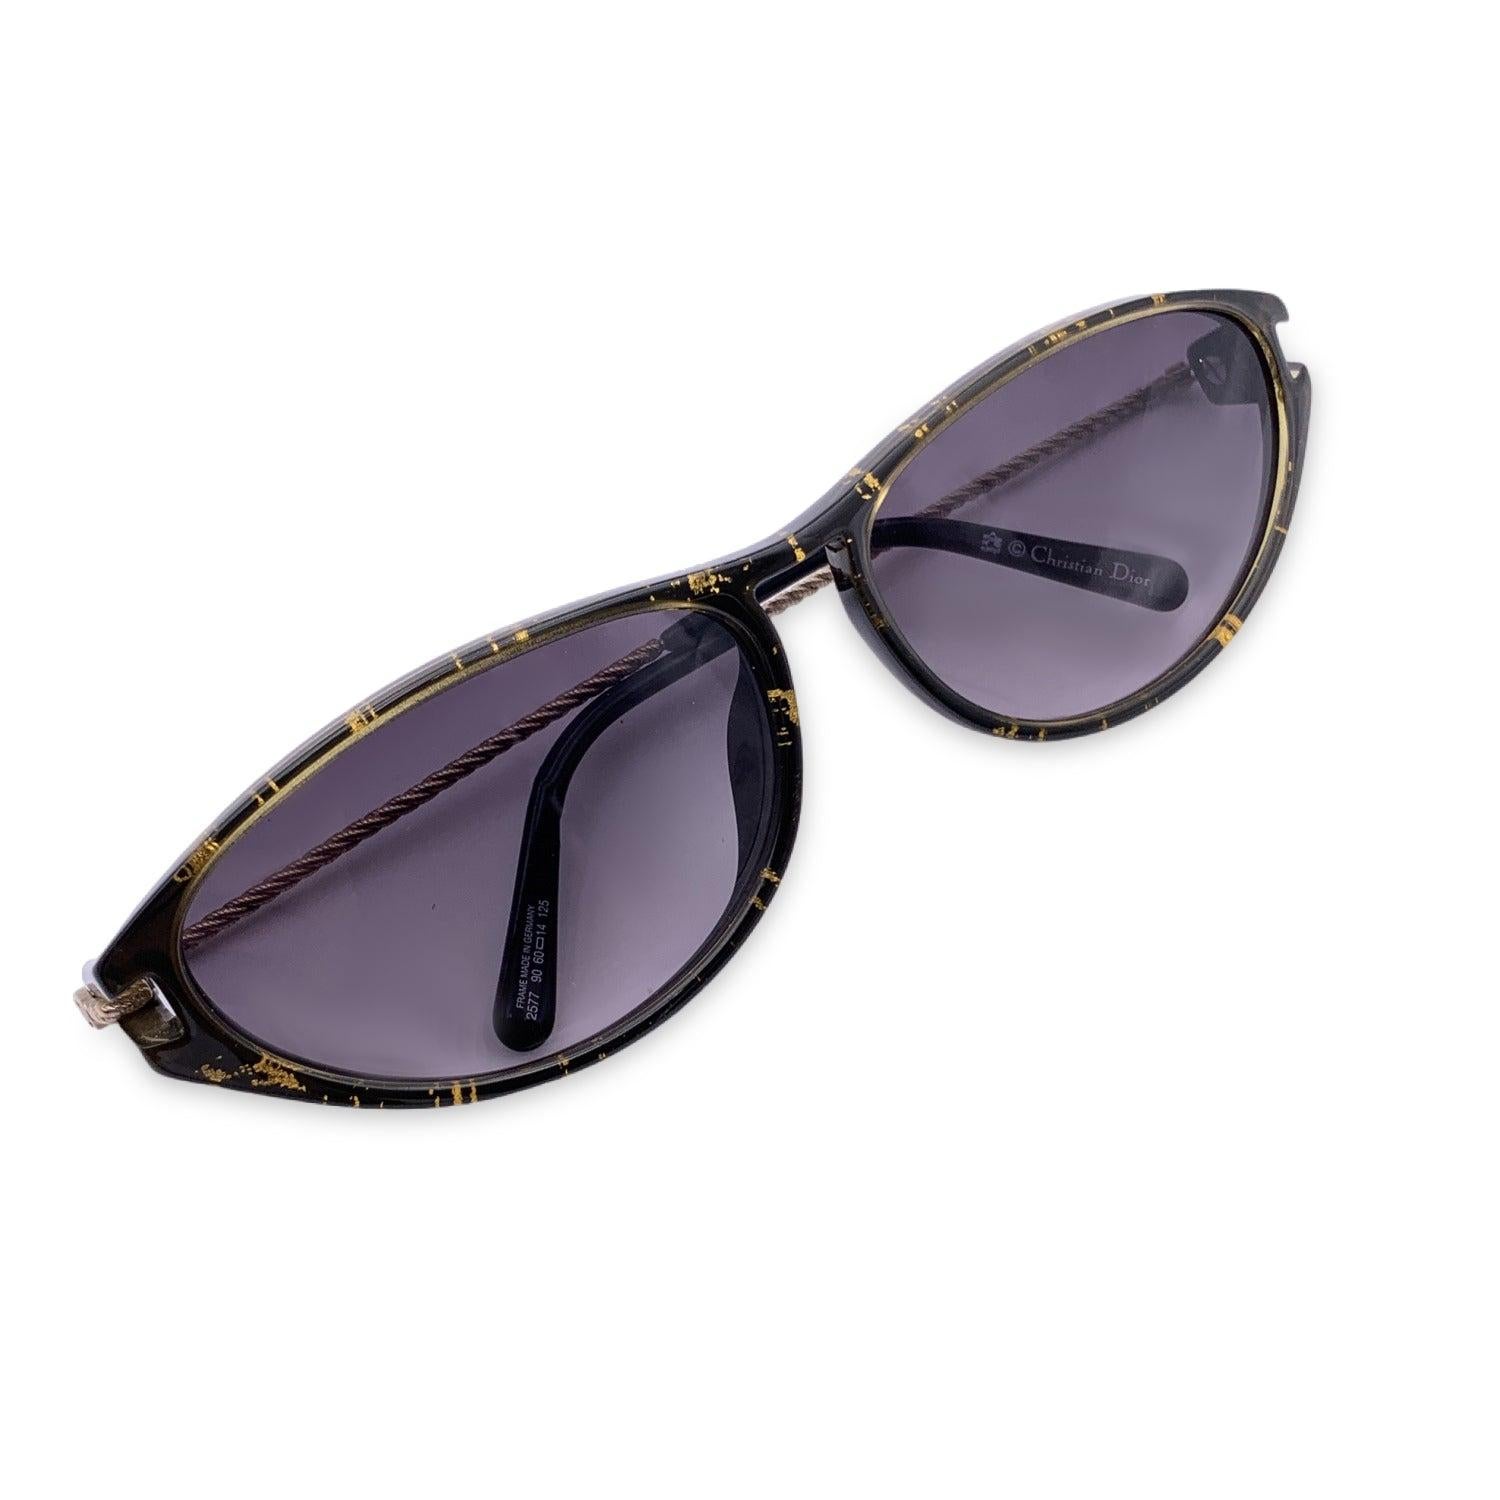 Vintage Christian Dior sunglasses, Mod. 2577 90 Optyl. Size: 60/14 125mm. Brown and gold acetate cat eye frame with gold metal ear stems. Original 100% Total UVA/UVB protection lenses in brown color. CD logo on temples. Details MATERIAL: Plastic